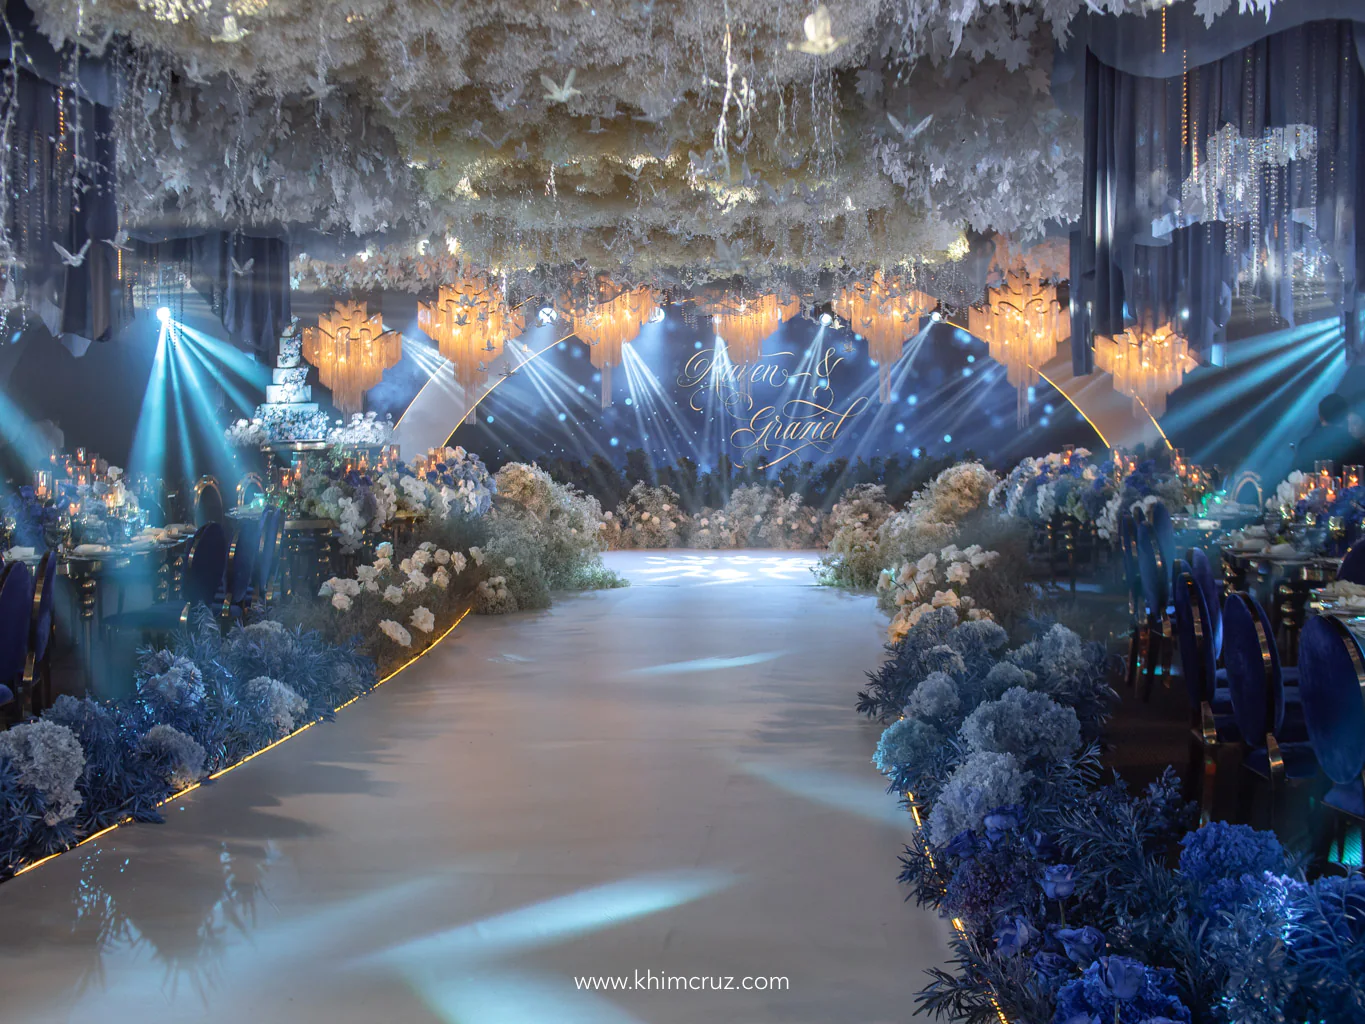 gradient blue floral arrangement on the dance floor for a cloud-filled setting with hanging chandeliers for a dreamy blue ethereal wedding